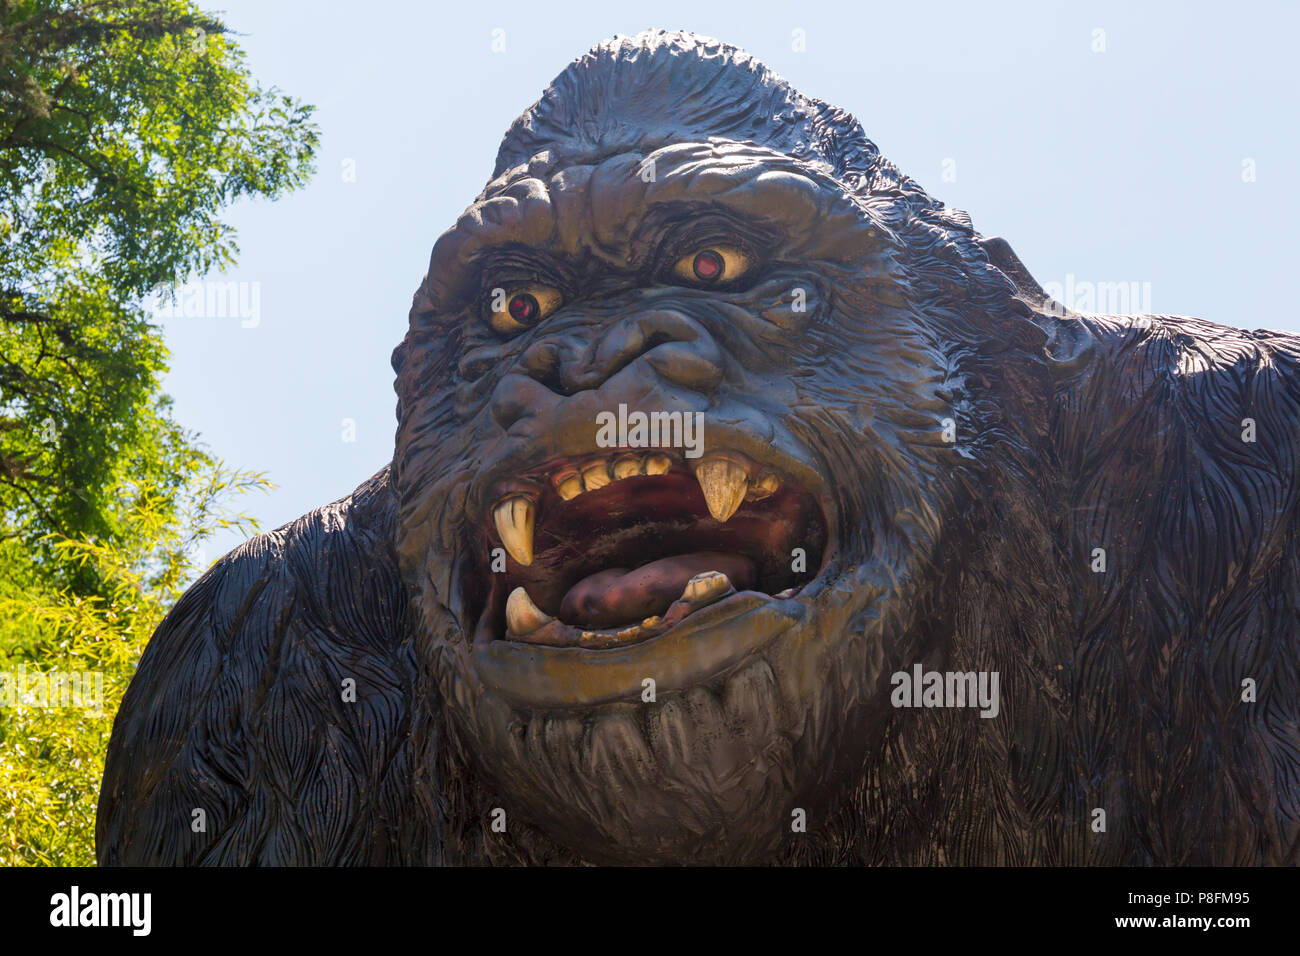 King Kong in the Prehistoric Dinosaur Valley at Wookey Hole, Wells ...